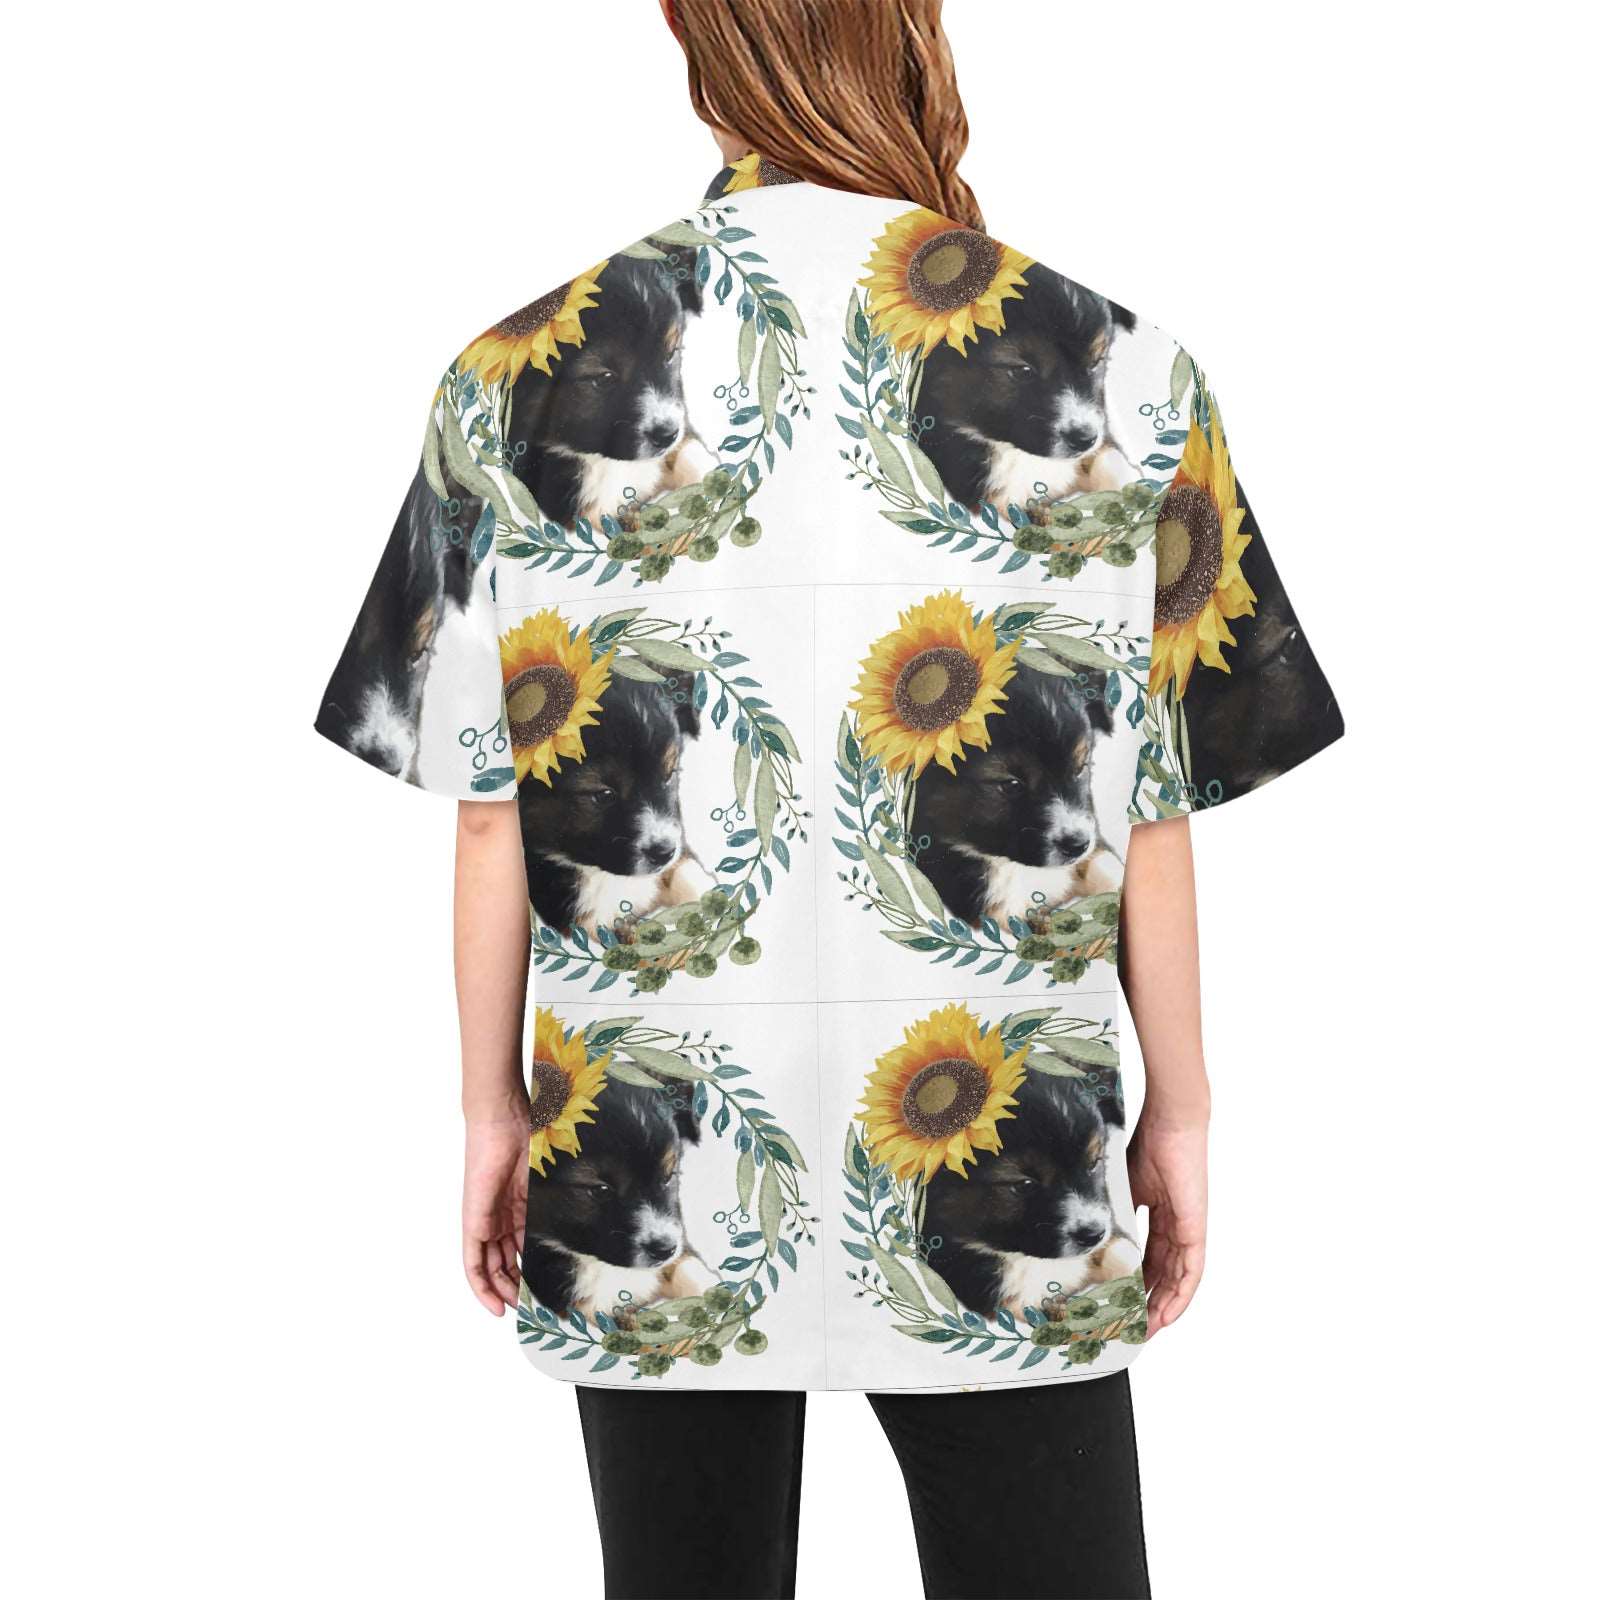 Black Puppy with Sunflowers Design Unisex Grooming Jacket with Zipper up to 2XL